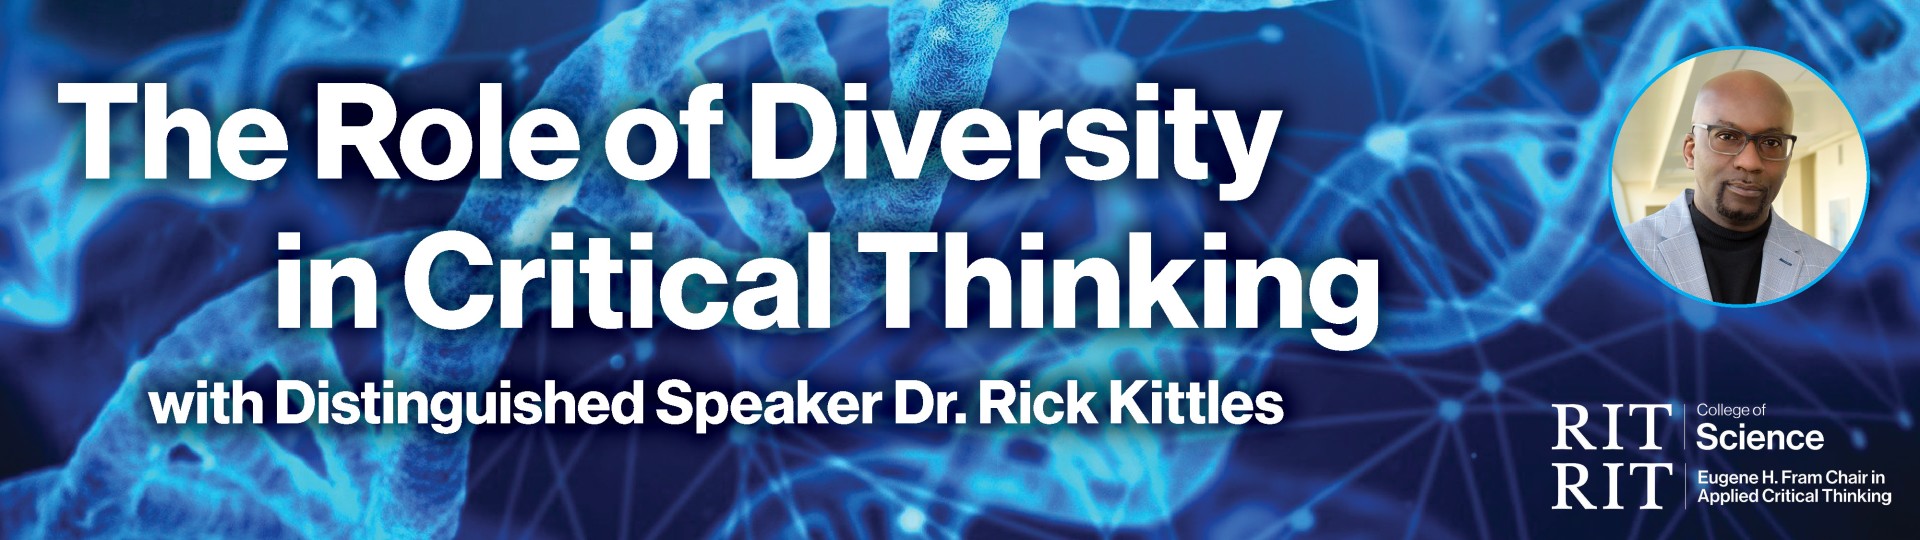 fram lecture rick kittles role of diversity in critical thinking